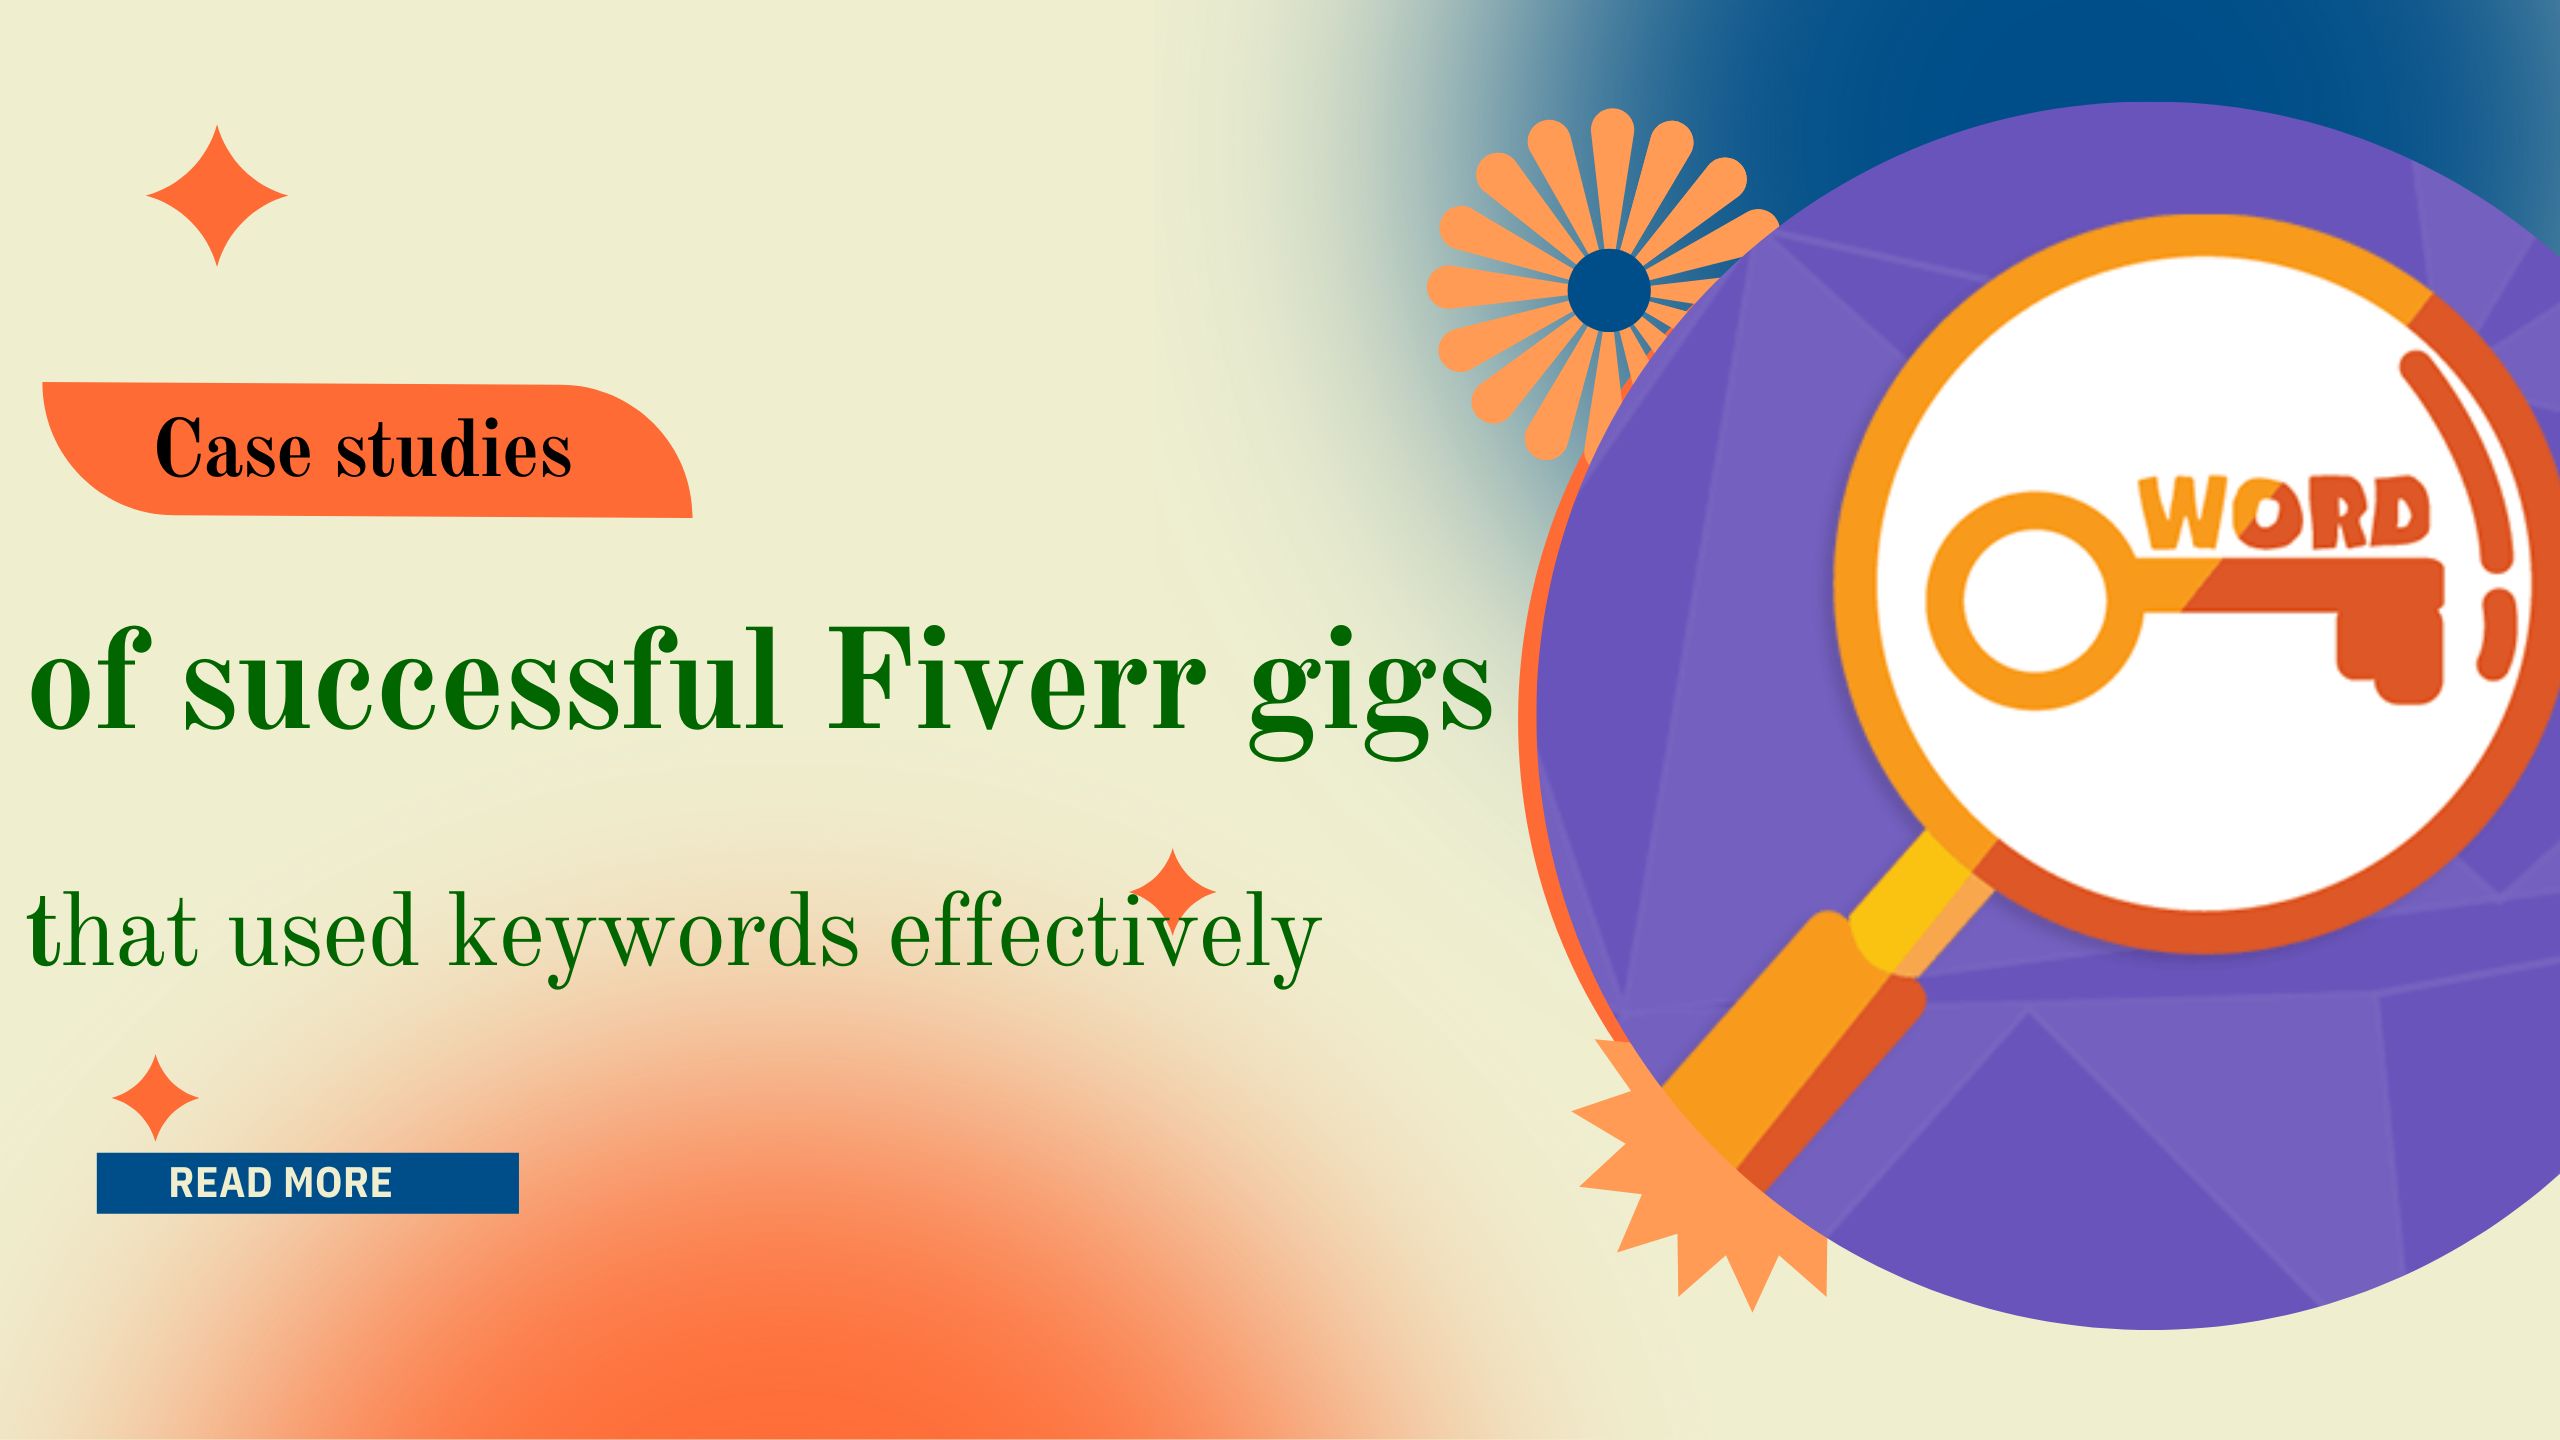 Case studies of successful Fiverr gigs that used keywords effectively